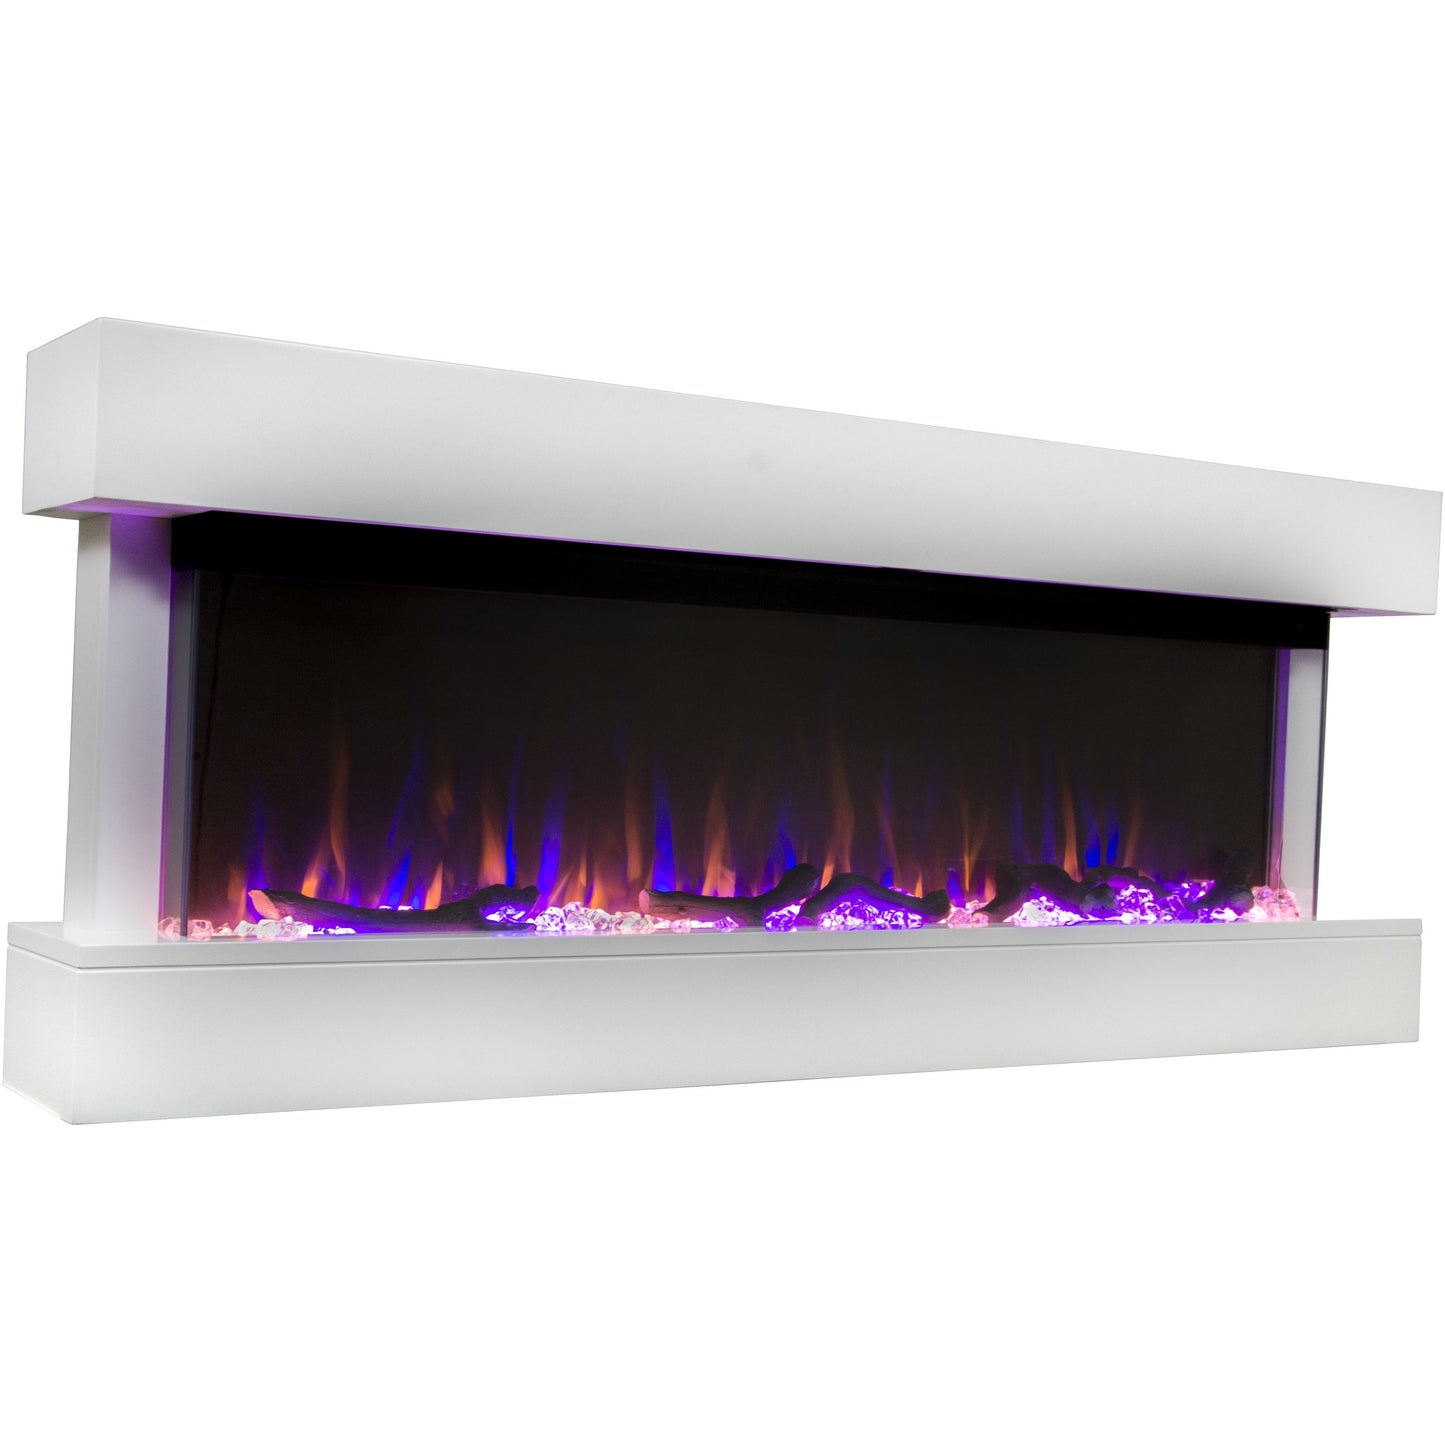 Touchstone Chesmont Wall Mount 50 inch Electric Fireplace in White | Very Good Fireplaces